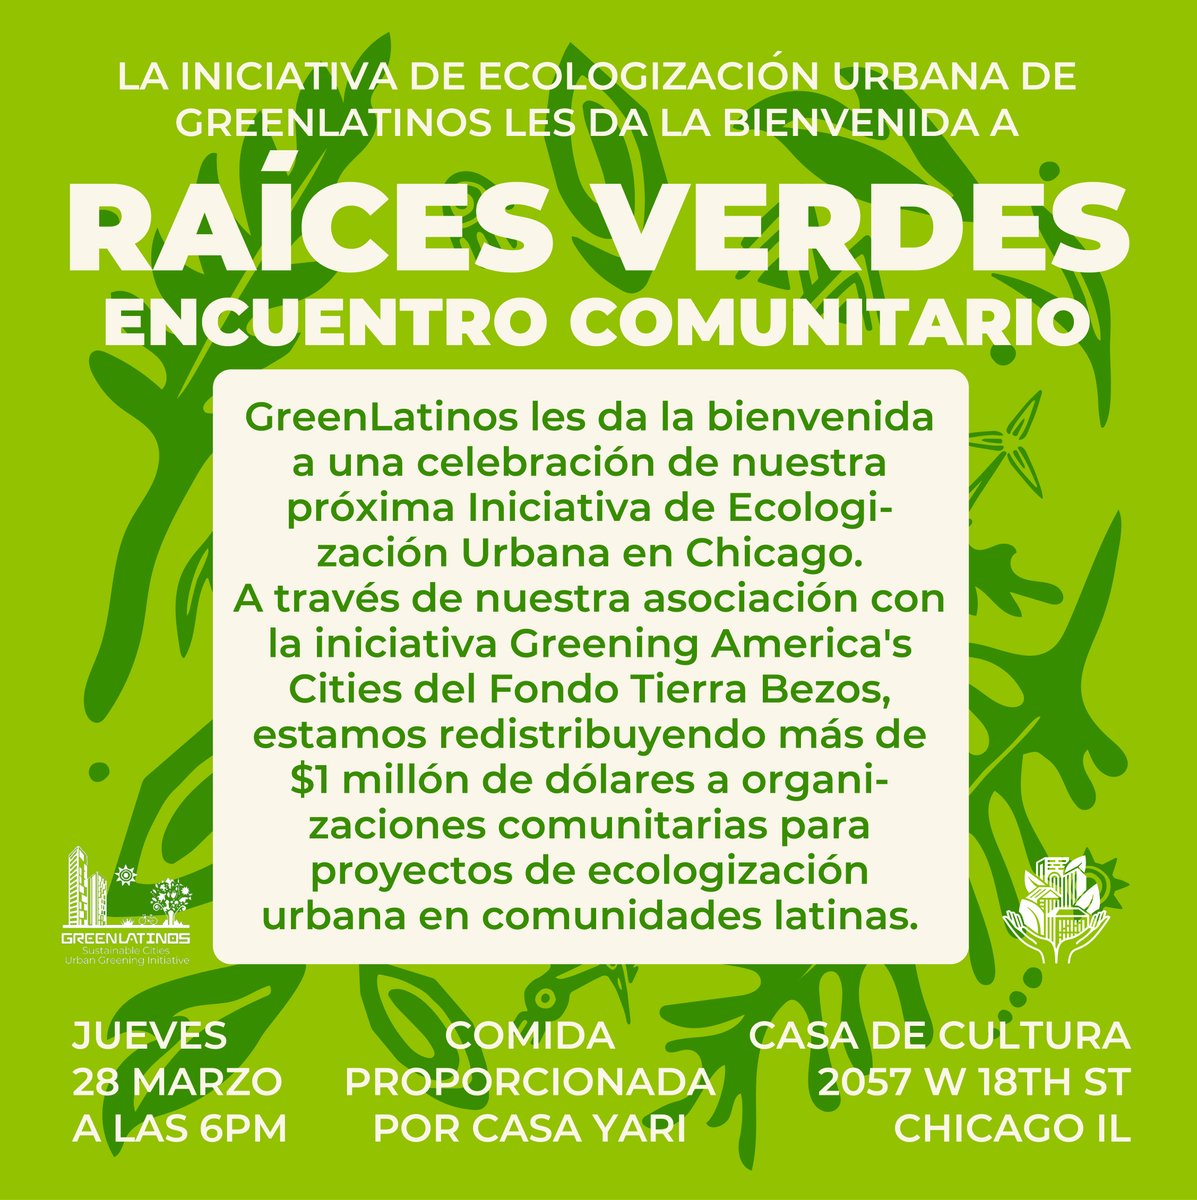 On March 28th, join us for the Raíces Verdes community dinner at Casa De Cultura, where @GreenLatinos will introduce the Urban Greening Initiative. N4EJ executive director Alfredo Romo will be a guest speaker during the night's community organization spotlight!